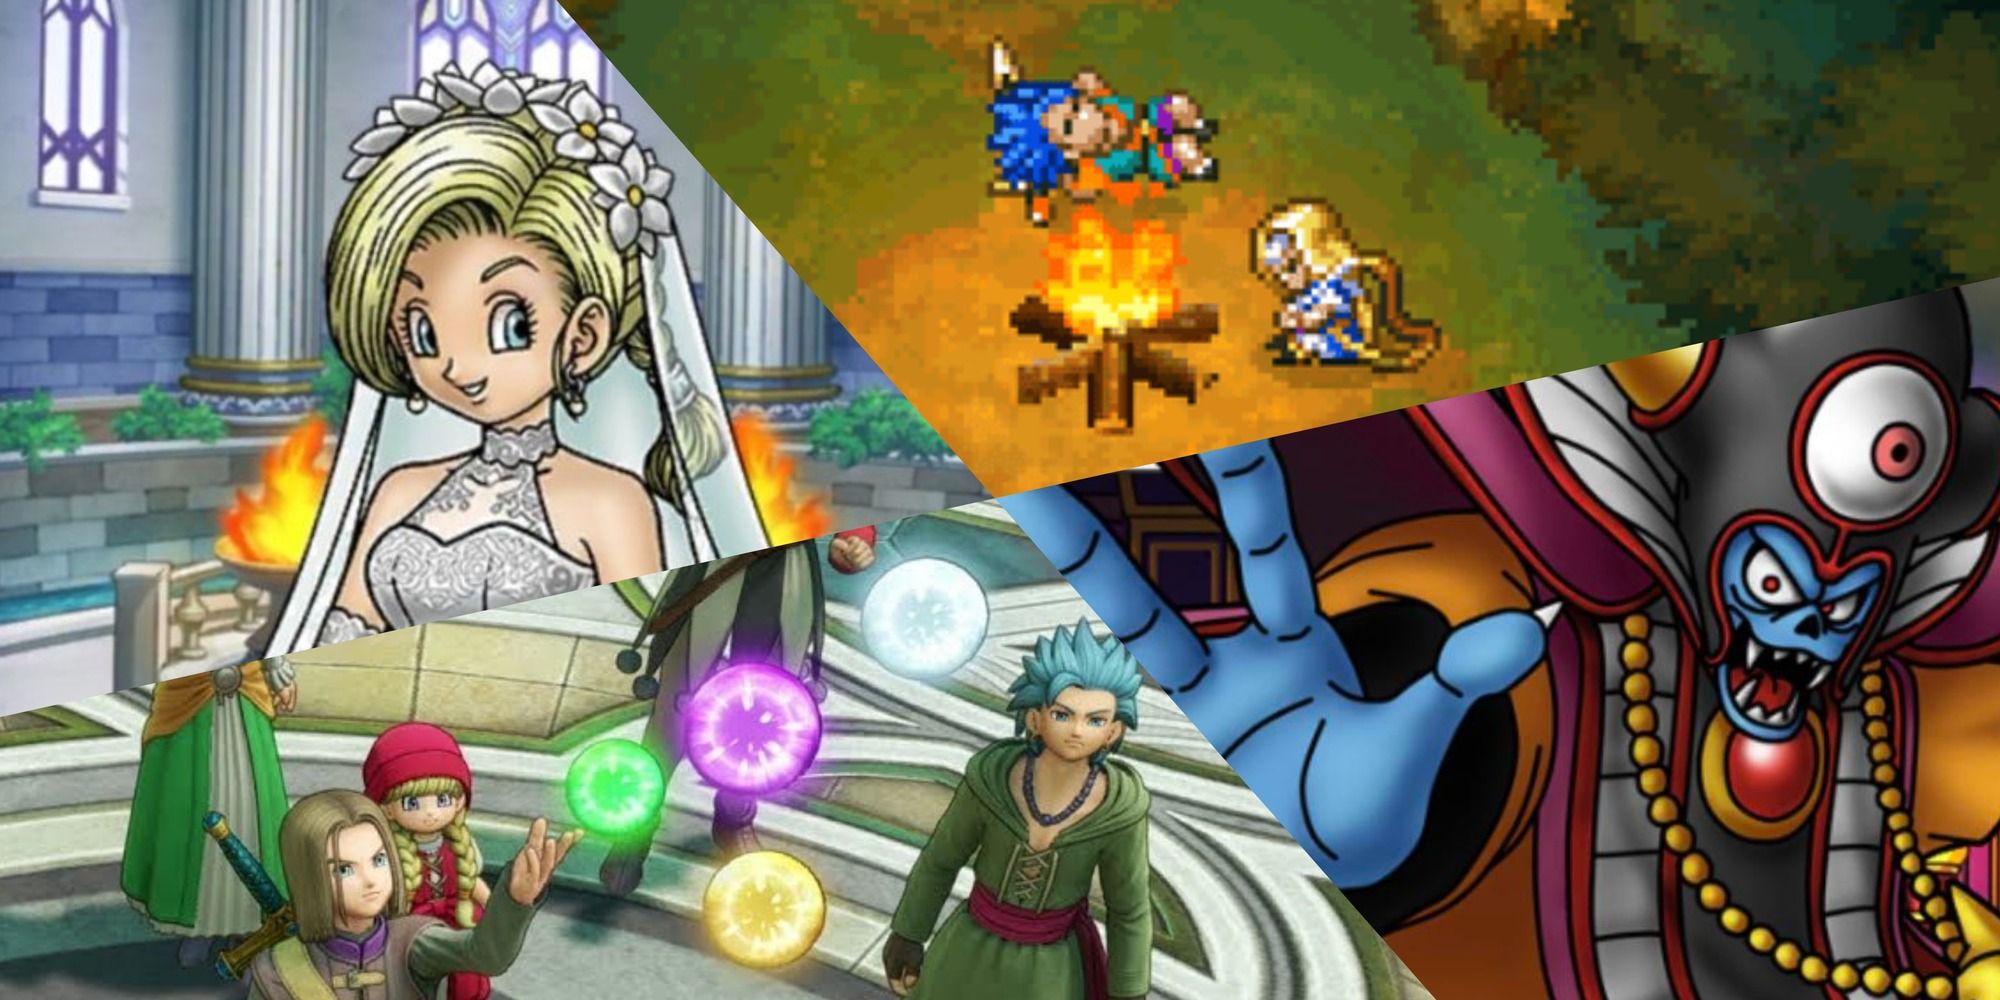 Dragon Quest iconic moments cover photo